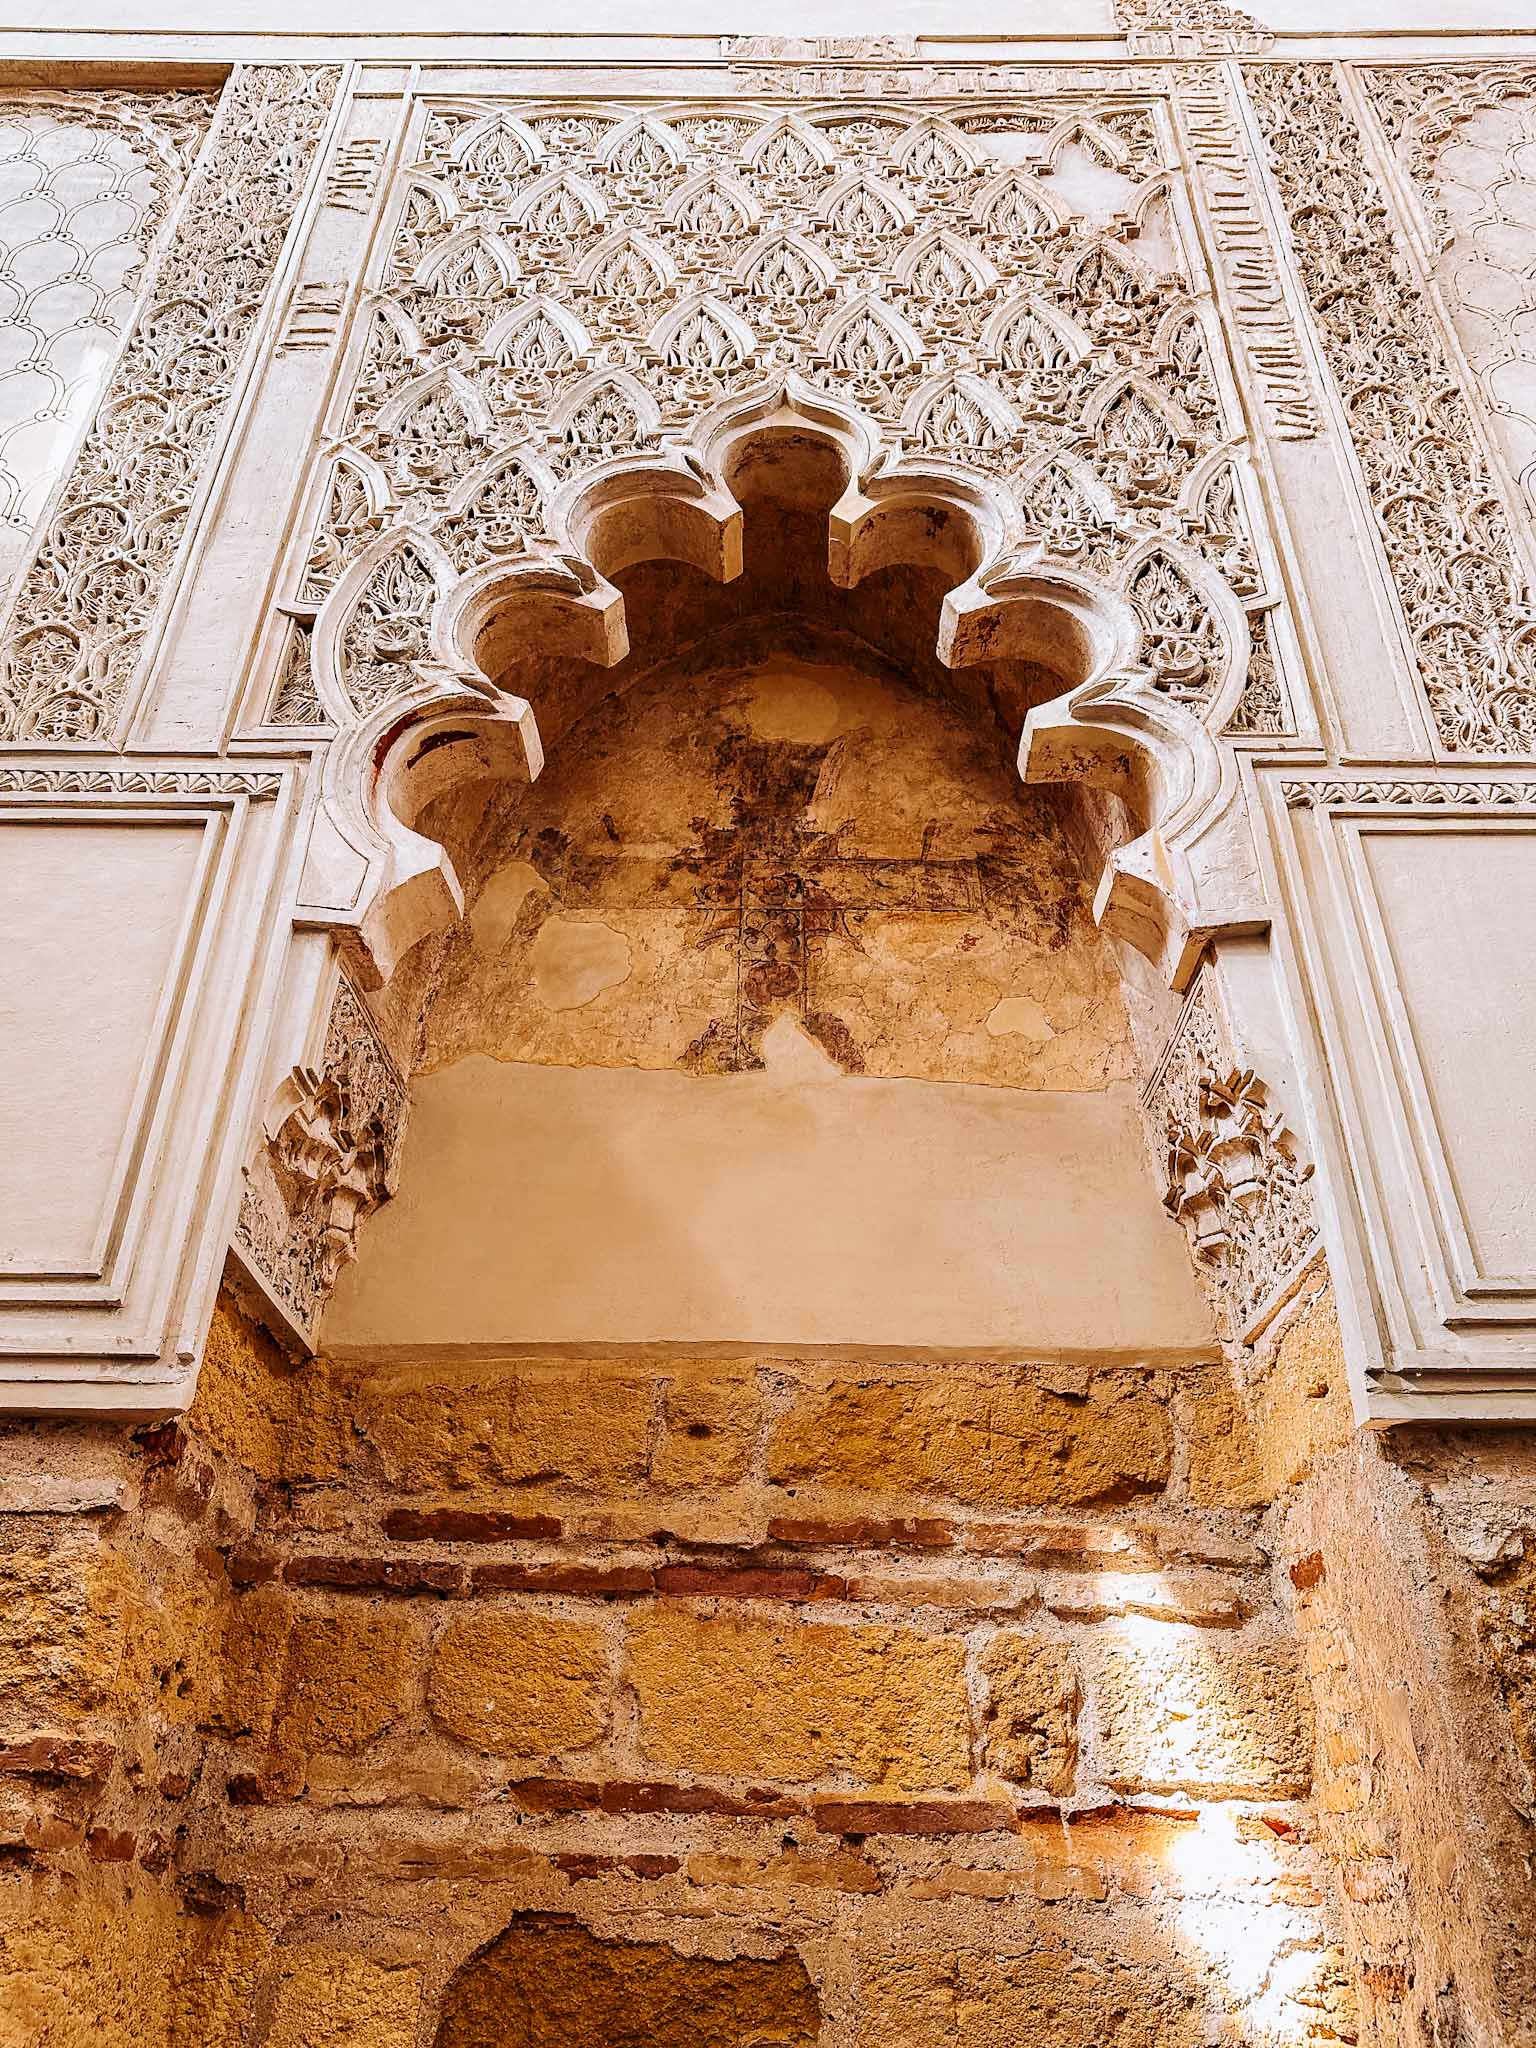 Cordoba Synagogue - best things to do in Cordoba, Spain